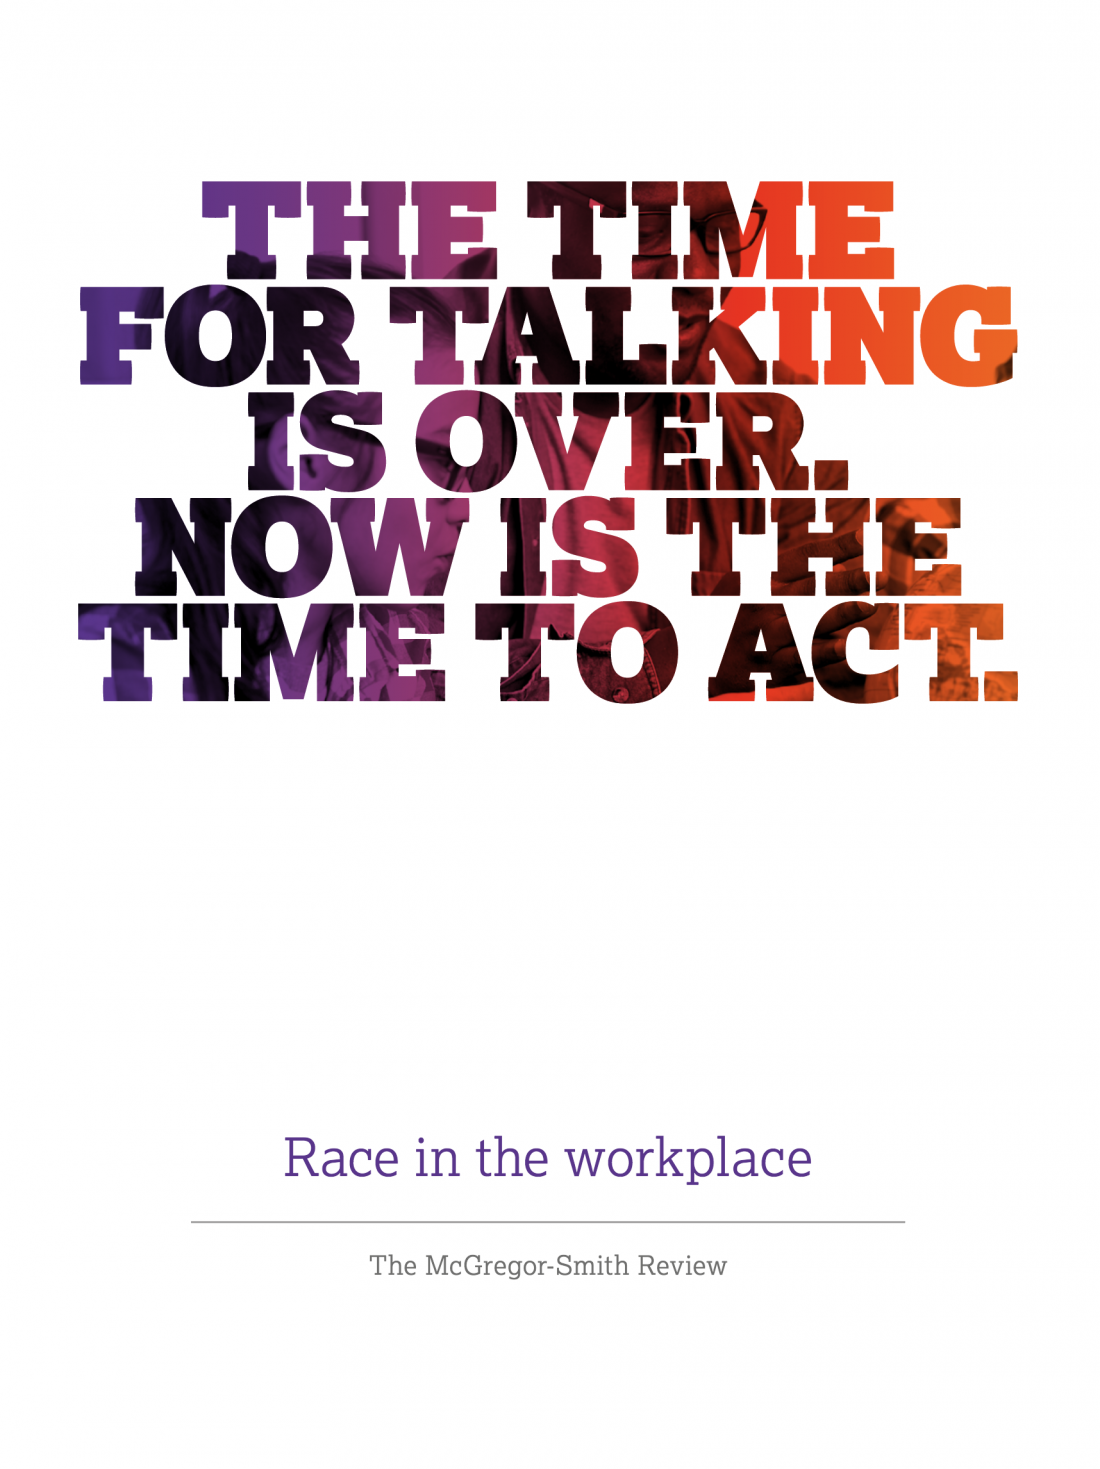 Race in the workplace